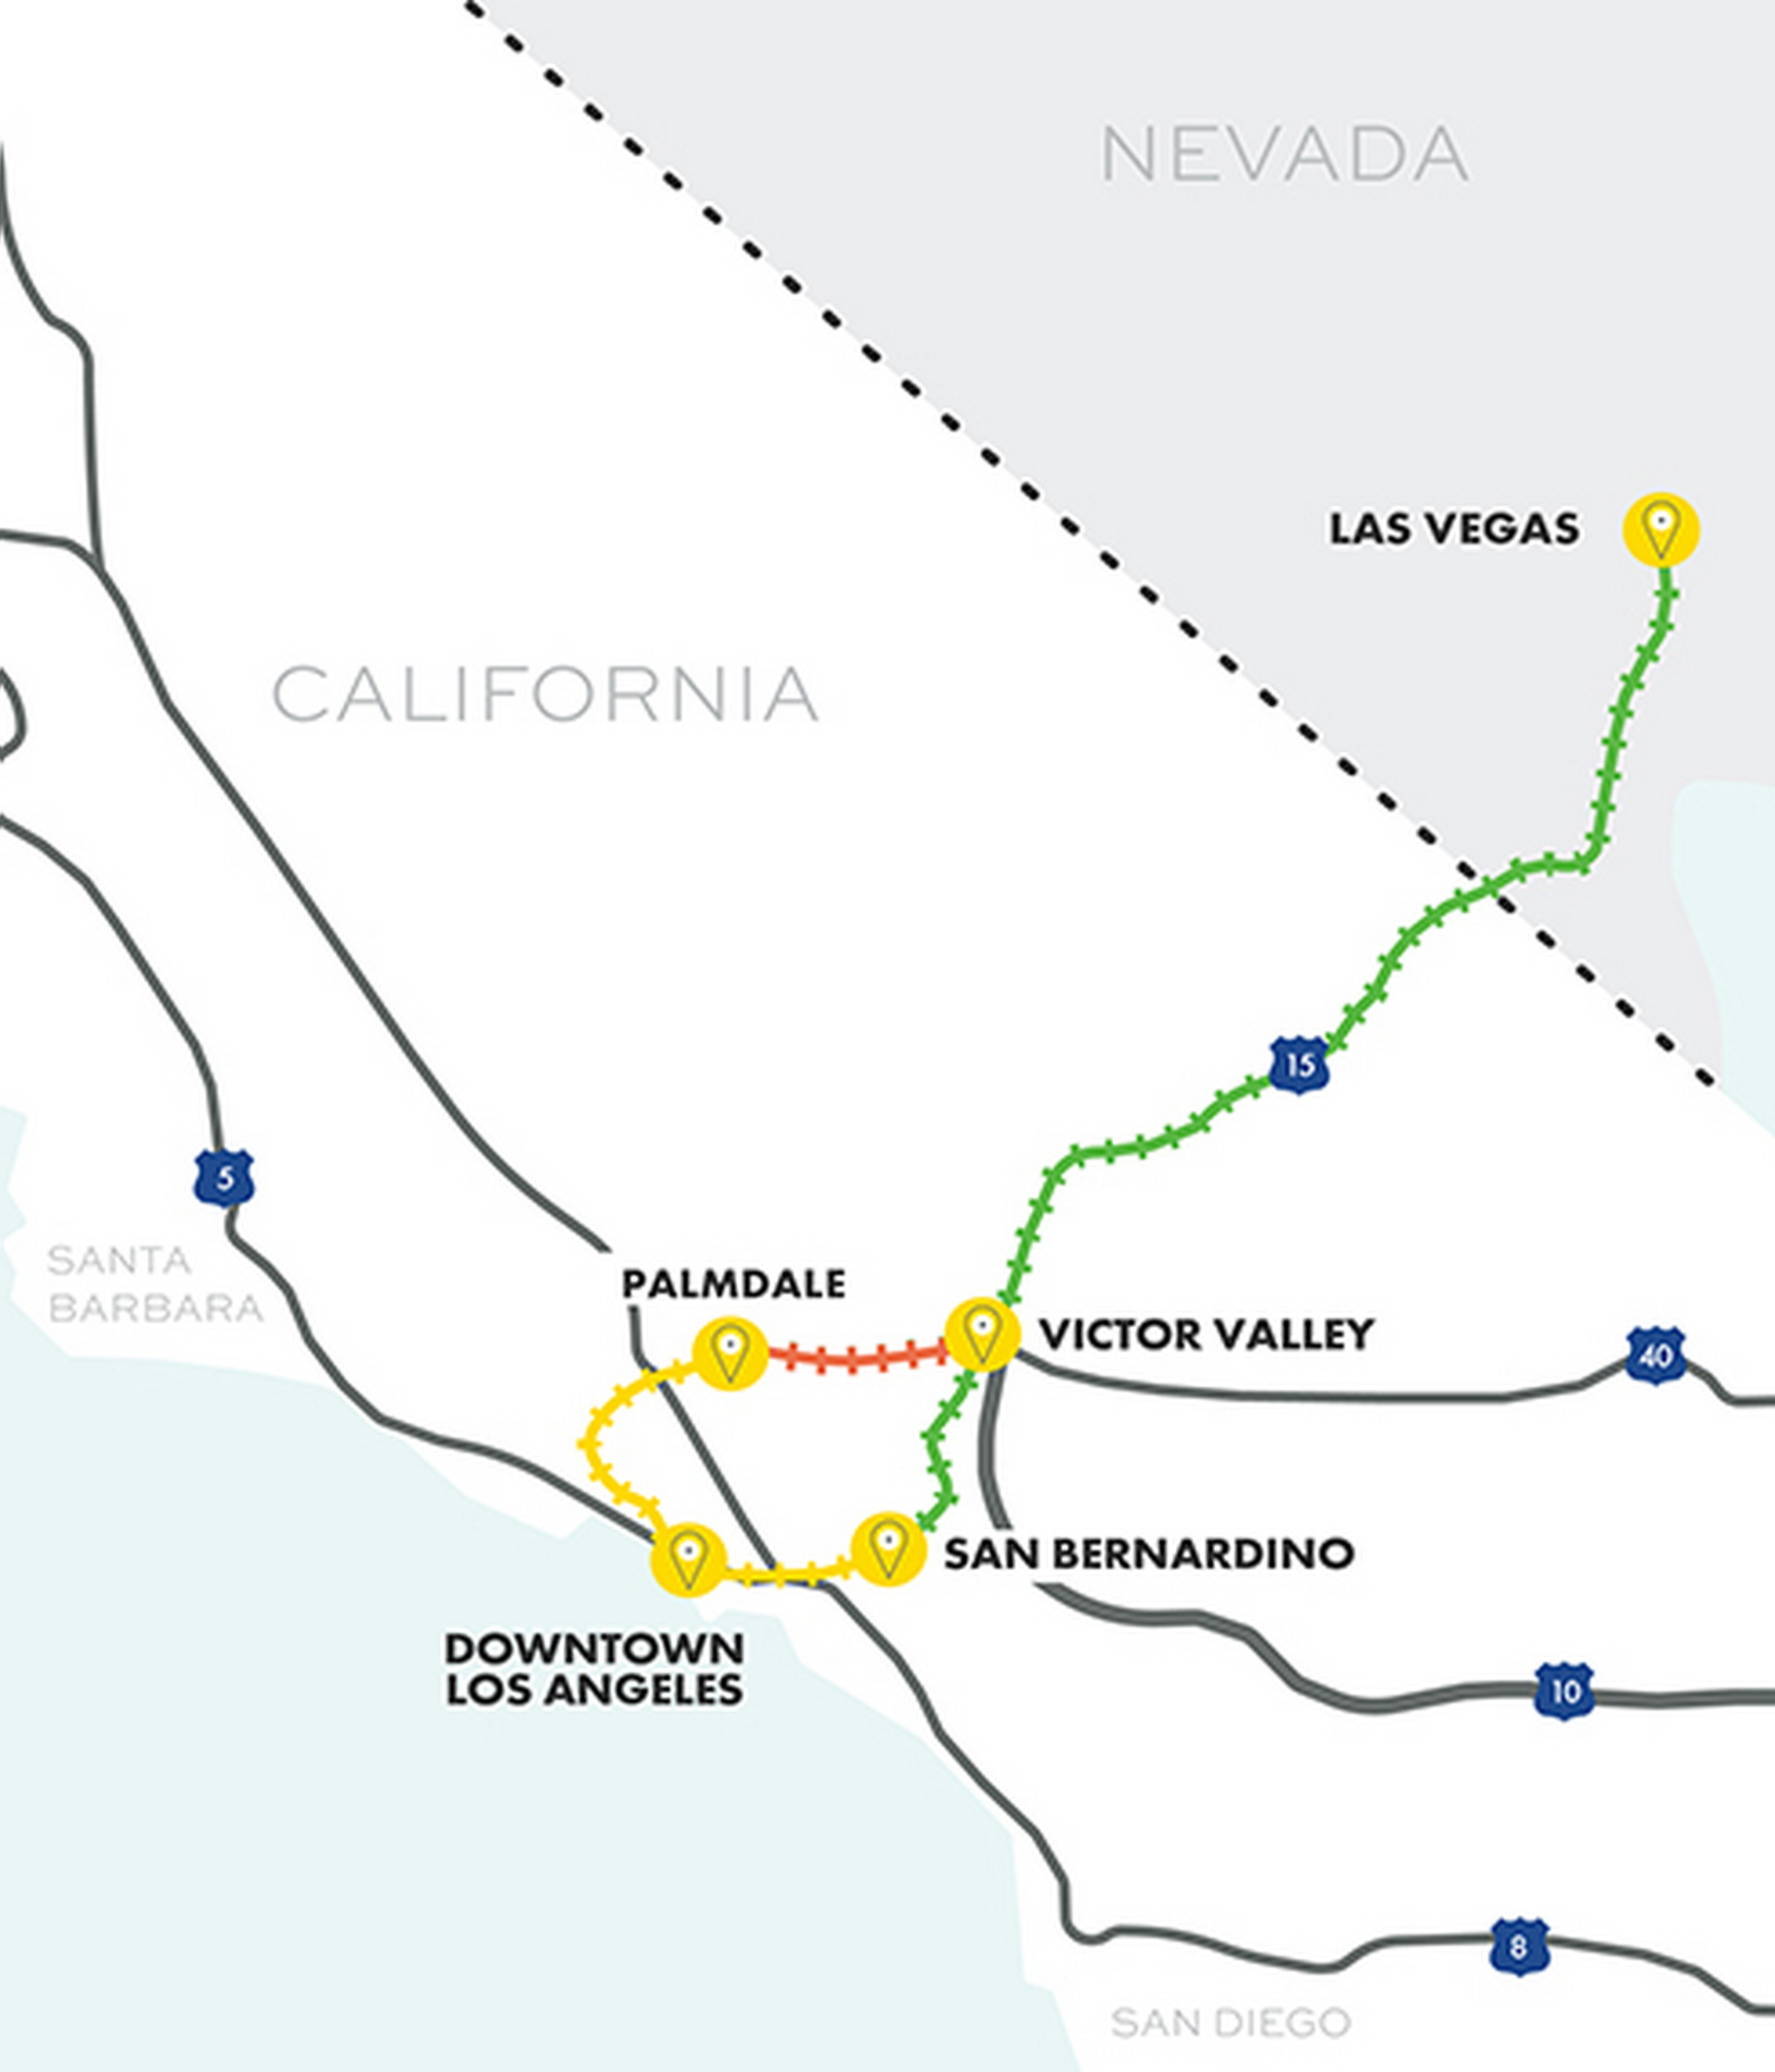 Delayed Las Vegas high-speed rail project now moving ahead - Los